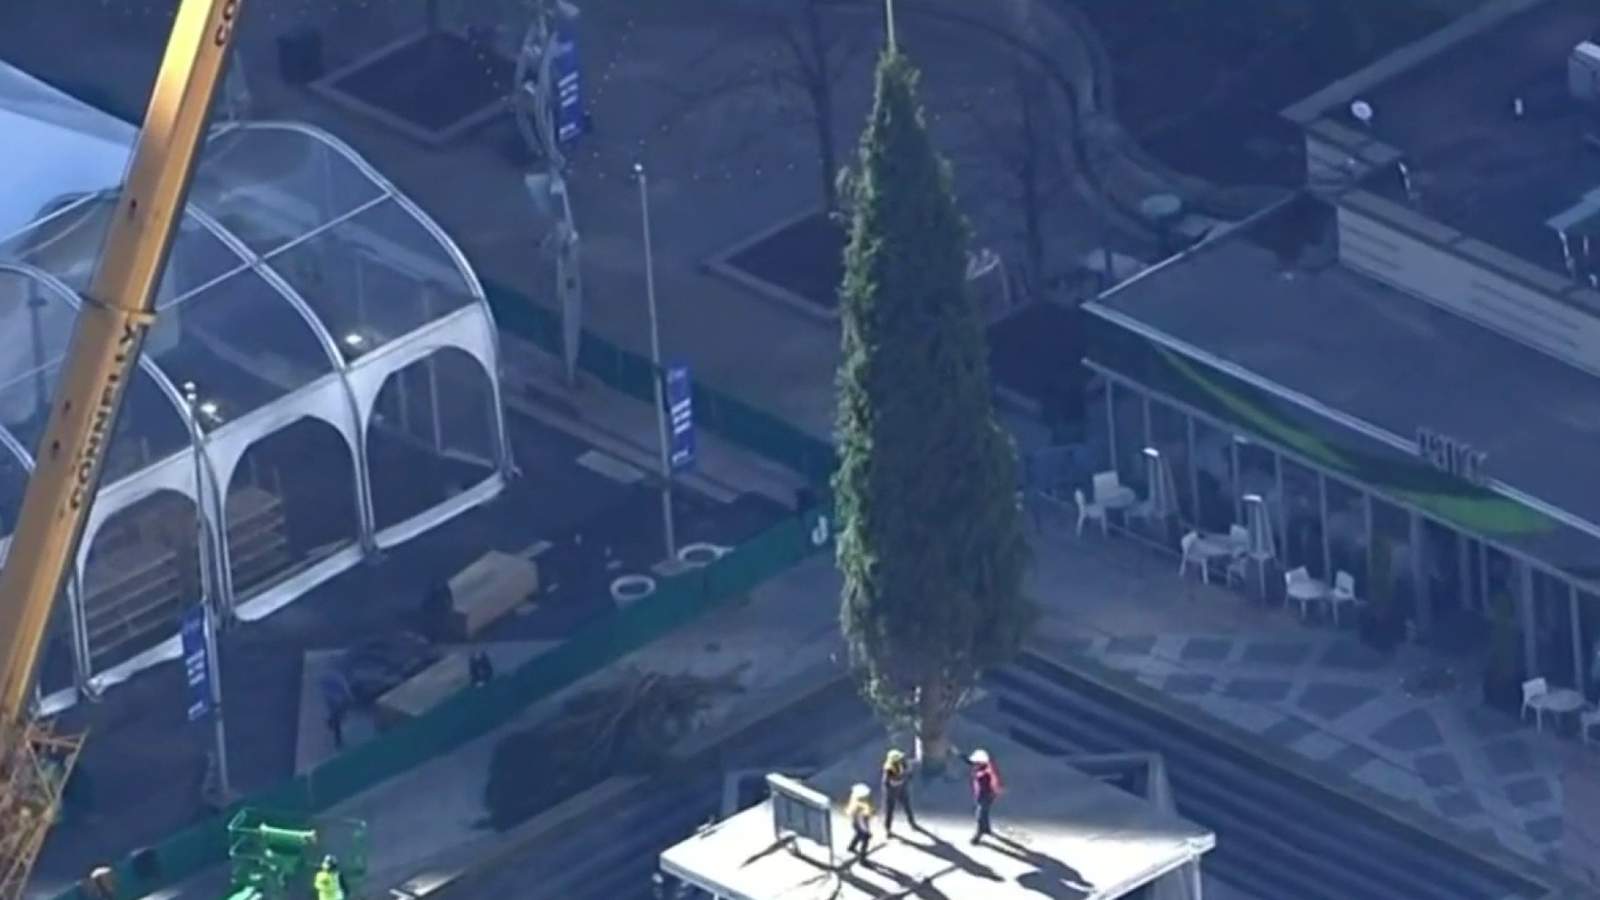 Detroit’s Christmas tree arrives at Campus Martius